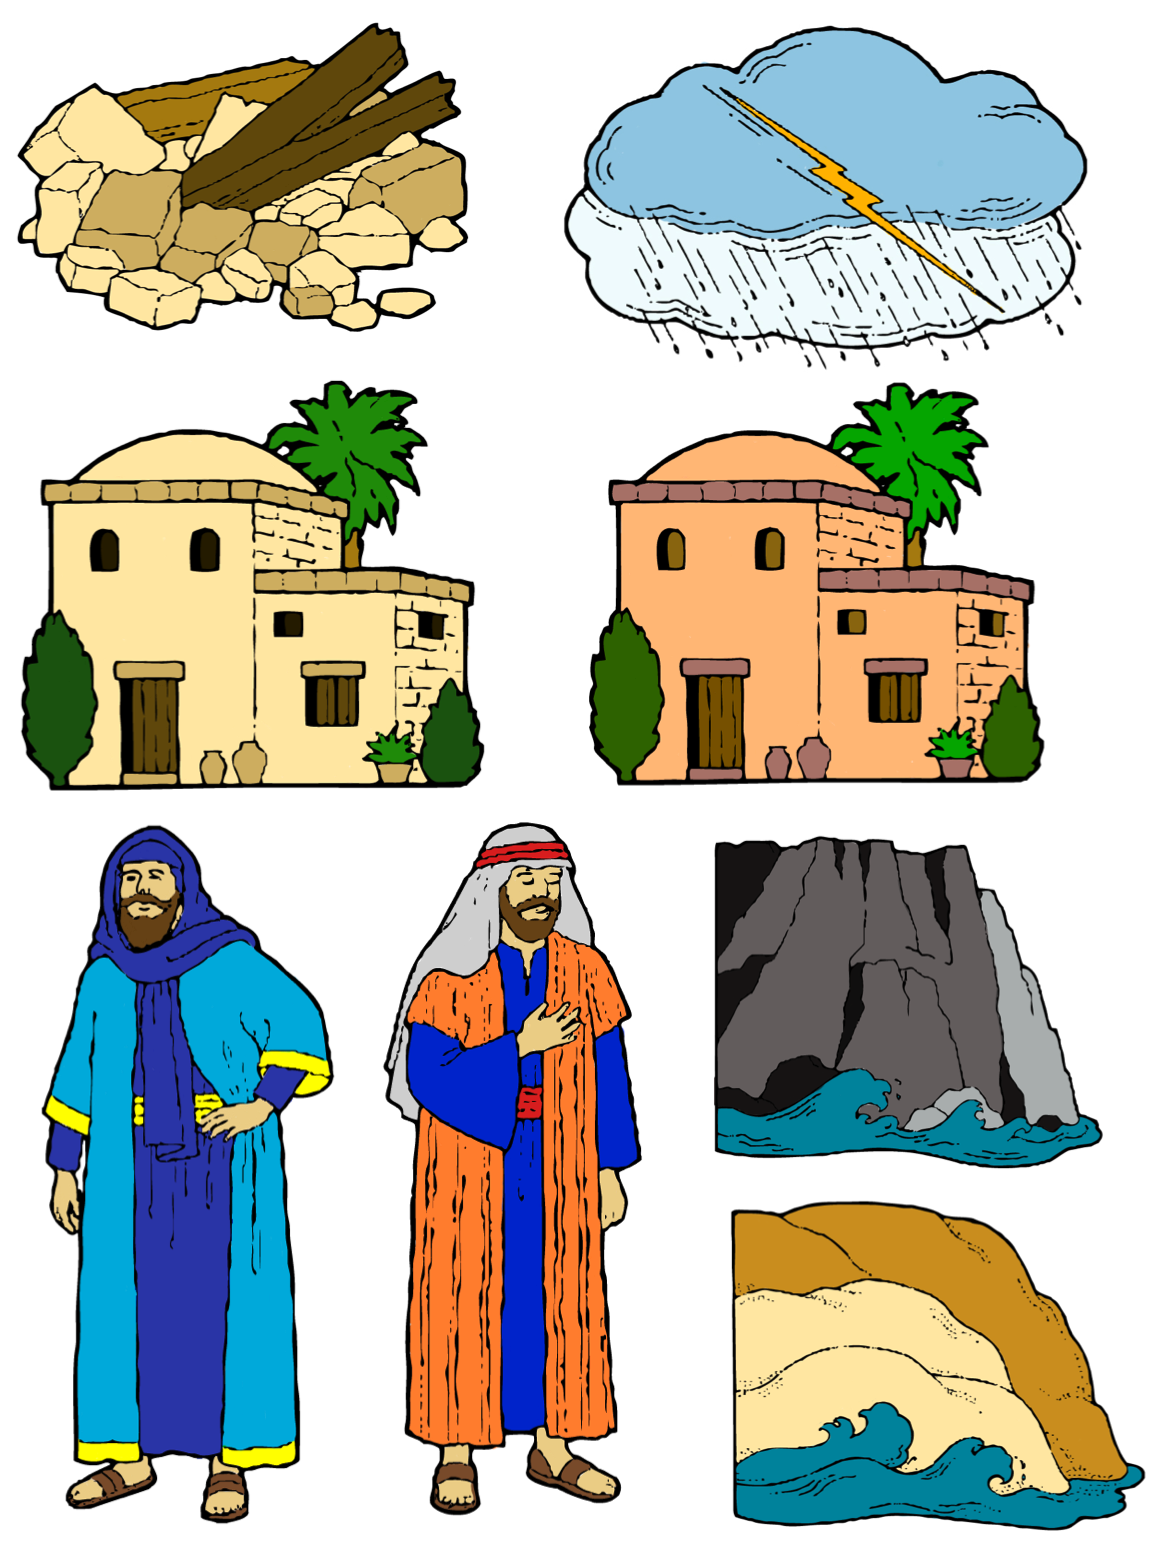 And On Parable Bible Wise House Of PNG Image